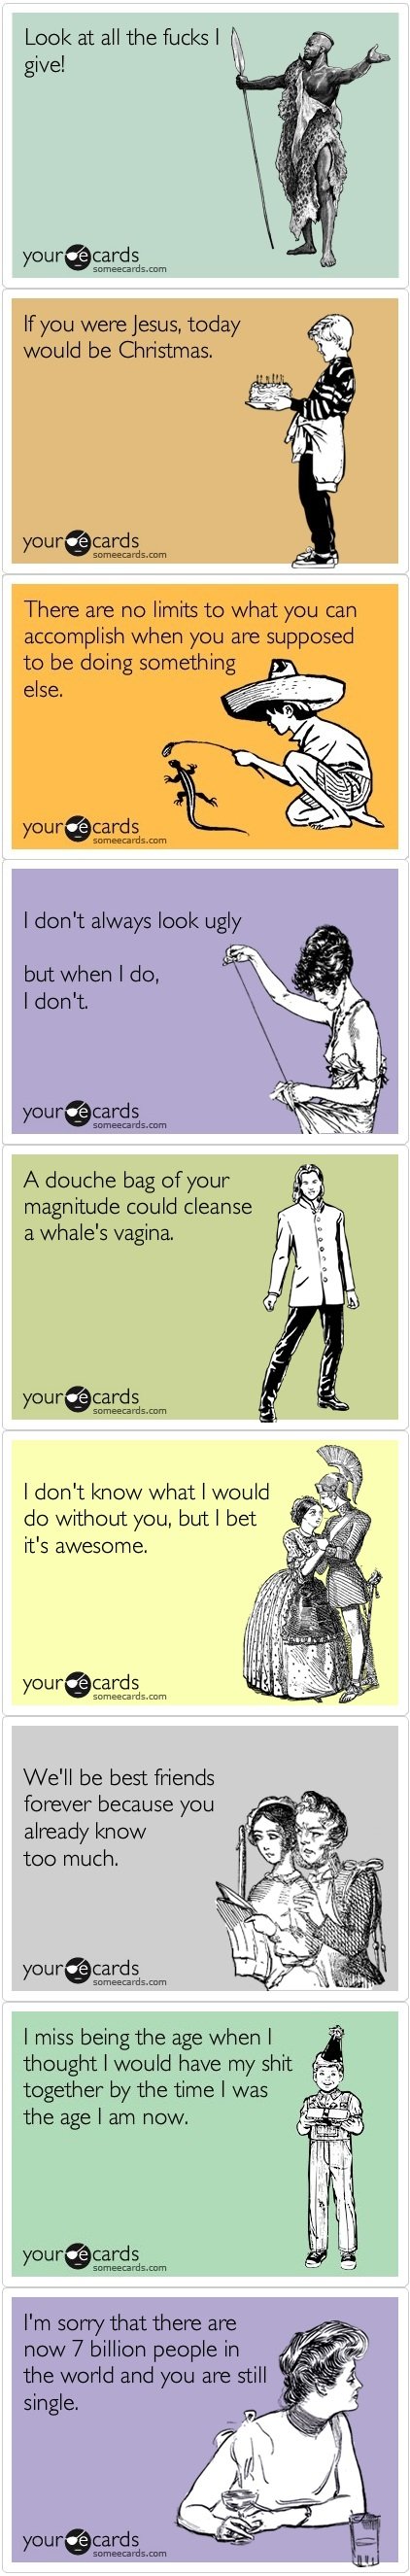 your-ecards-2